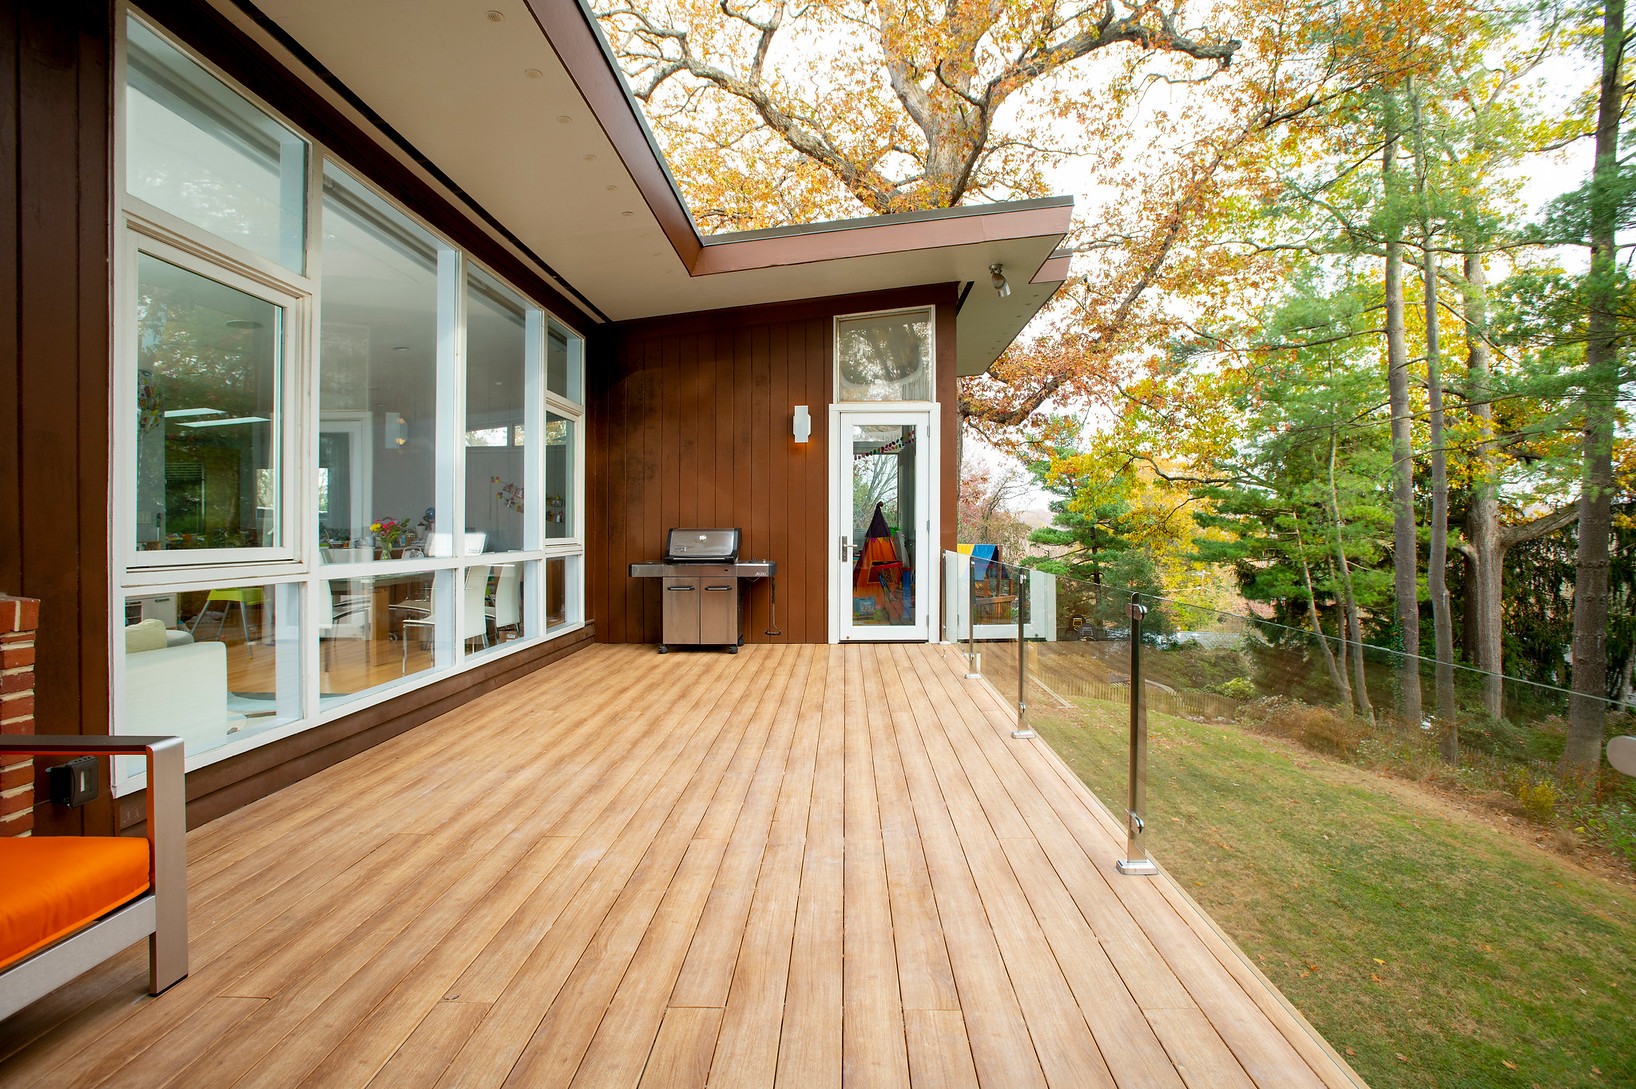 What Should Be Included in Your Contract for a Deck Project?